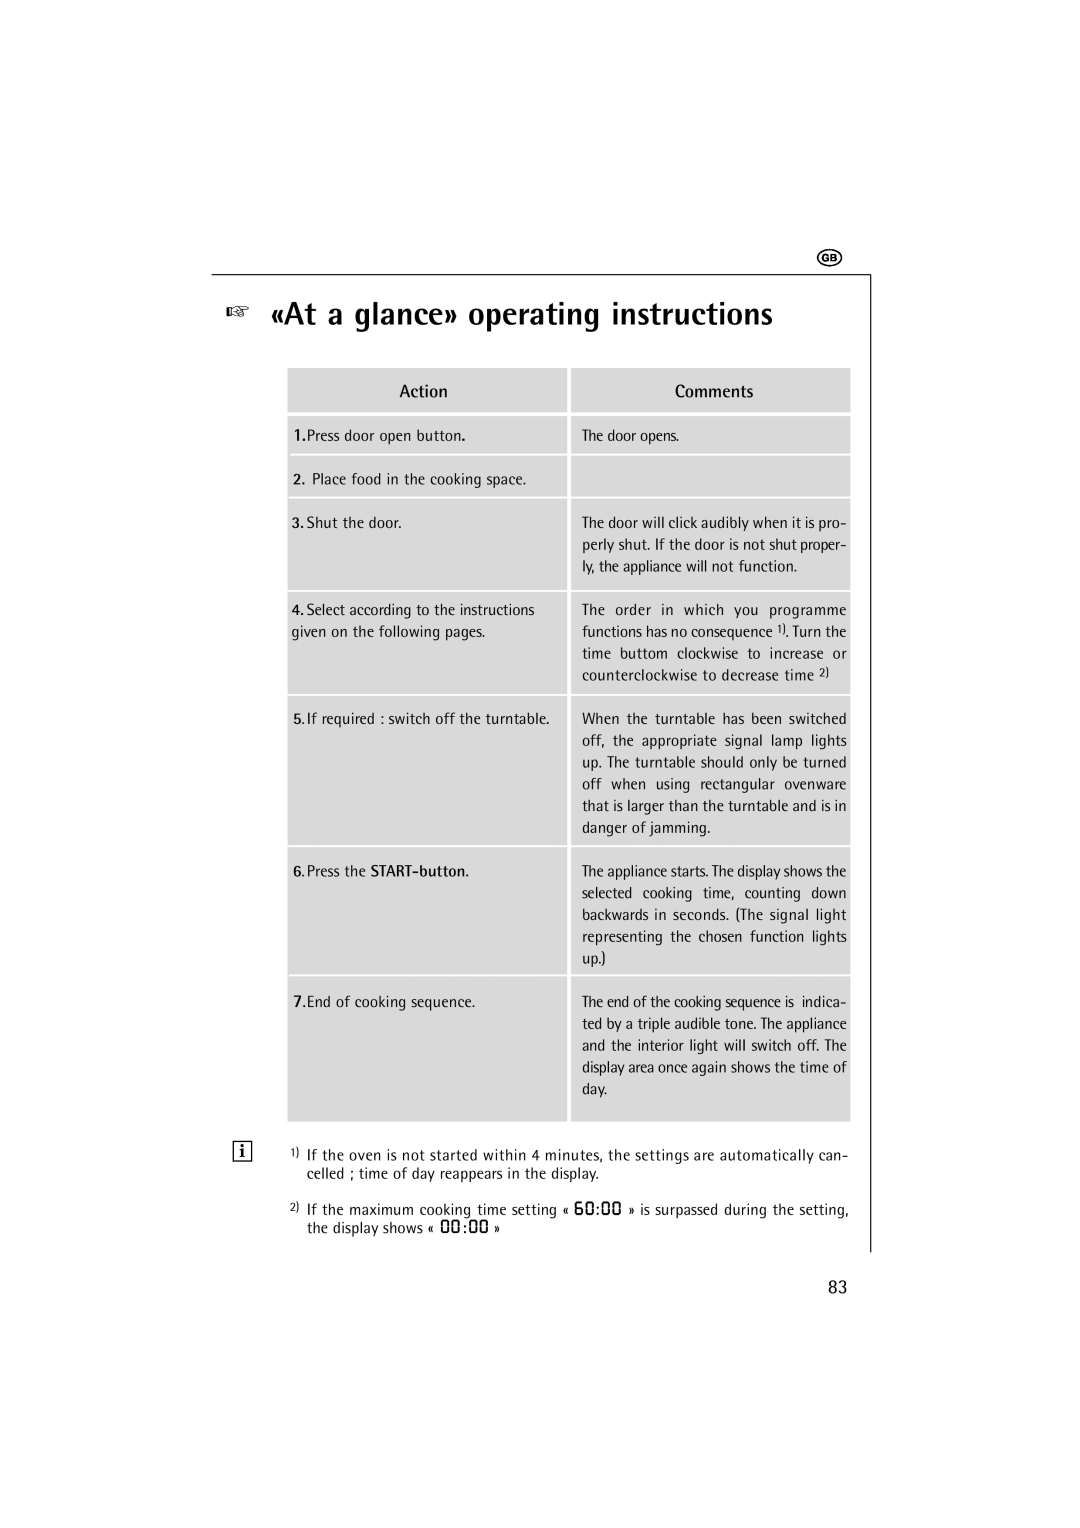 AEG 1231 E manual «At a glance» operating instructions, Action, Comments, Press the START-button 